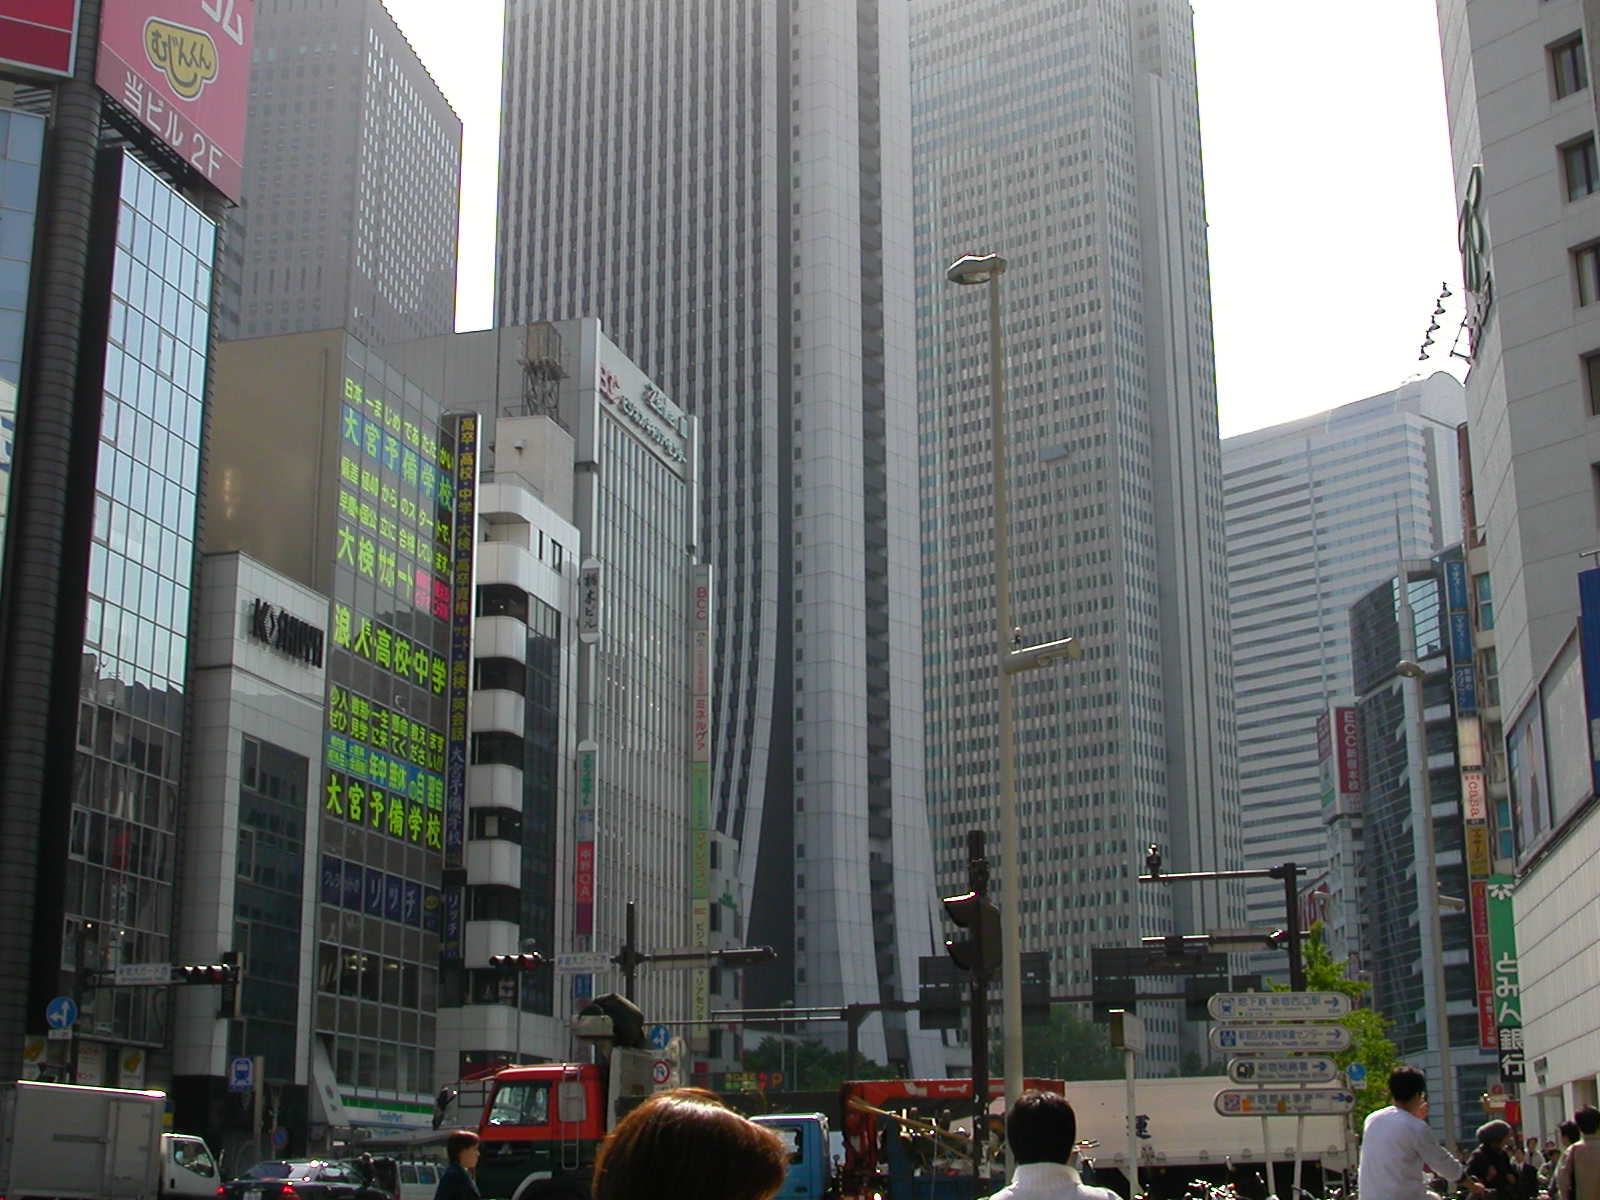 One of the more prominent view of Shinjuku, which is the skyscraper center of Tokyo